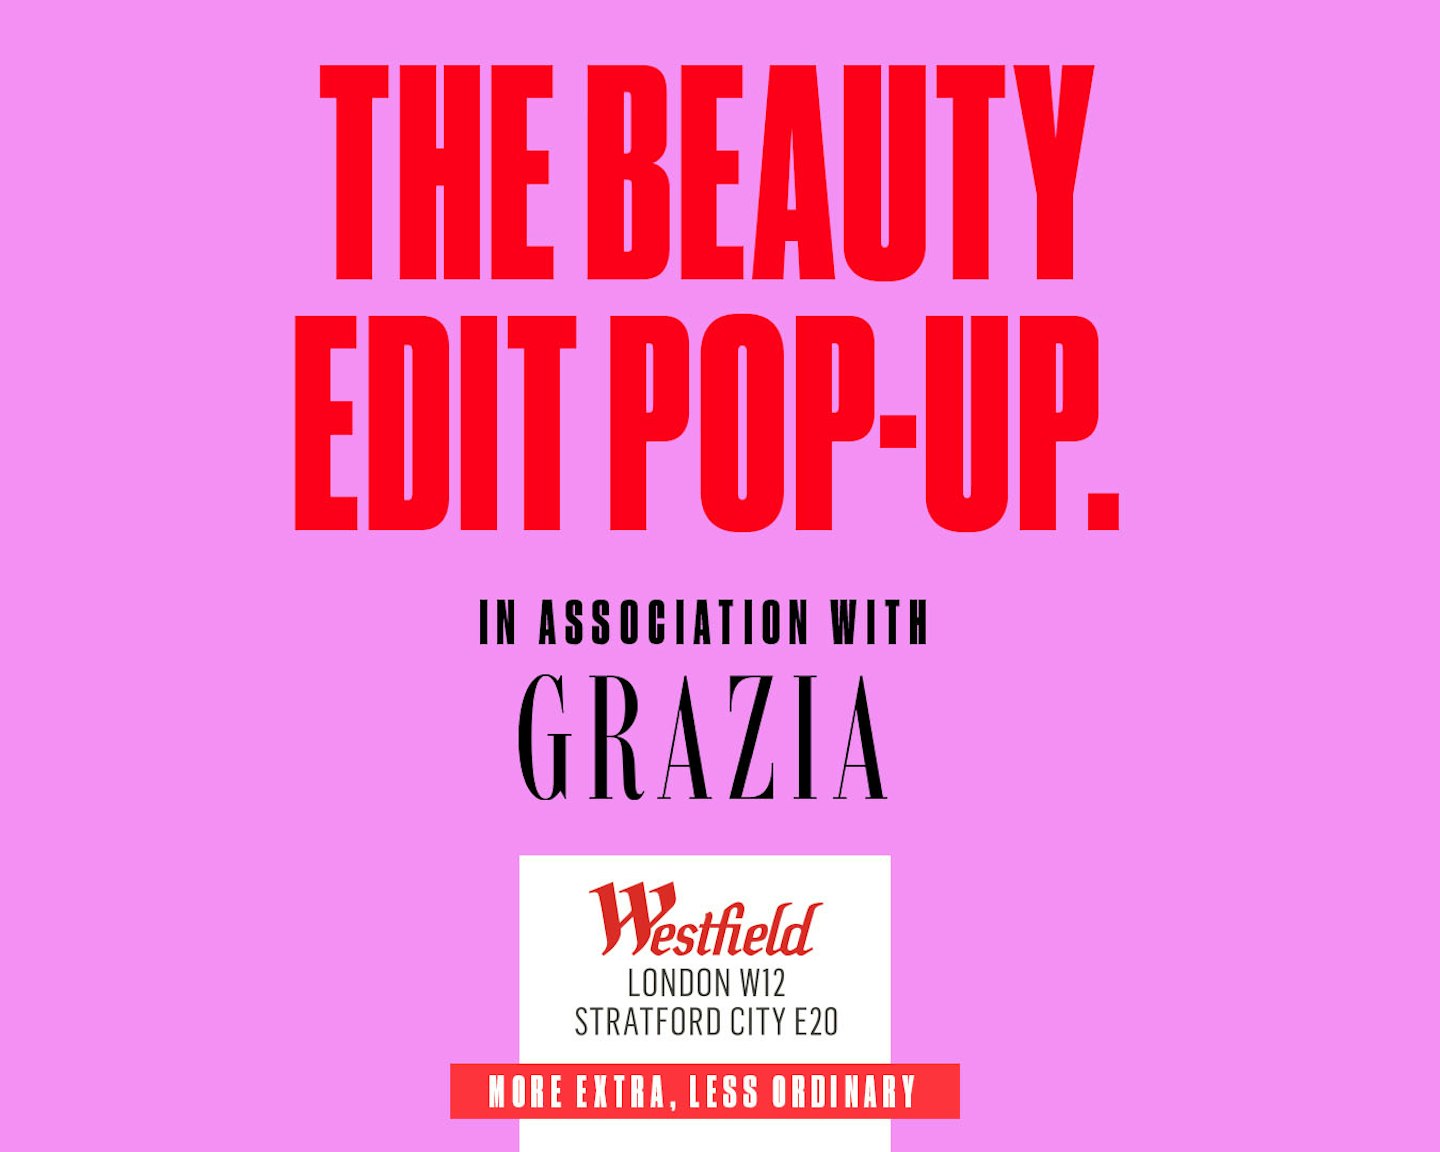 GRAND STORE OPENING 14th MARCH, WESTFIELD LONDON!!! ARE YOU COMING??! –  FWBEAUTY